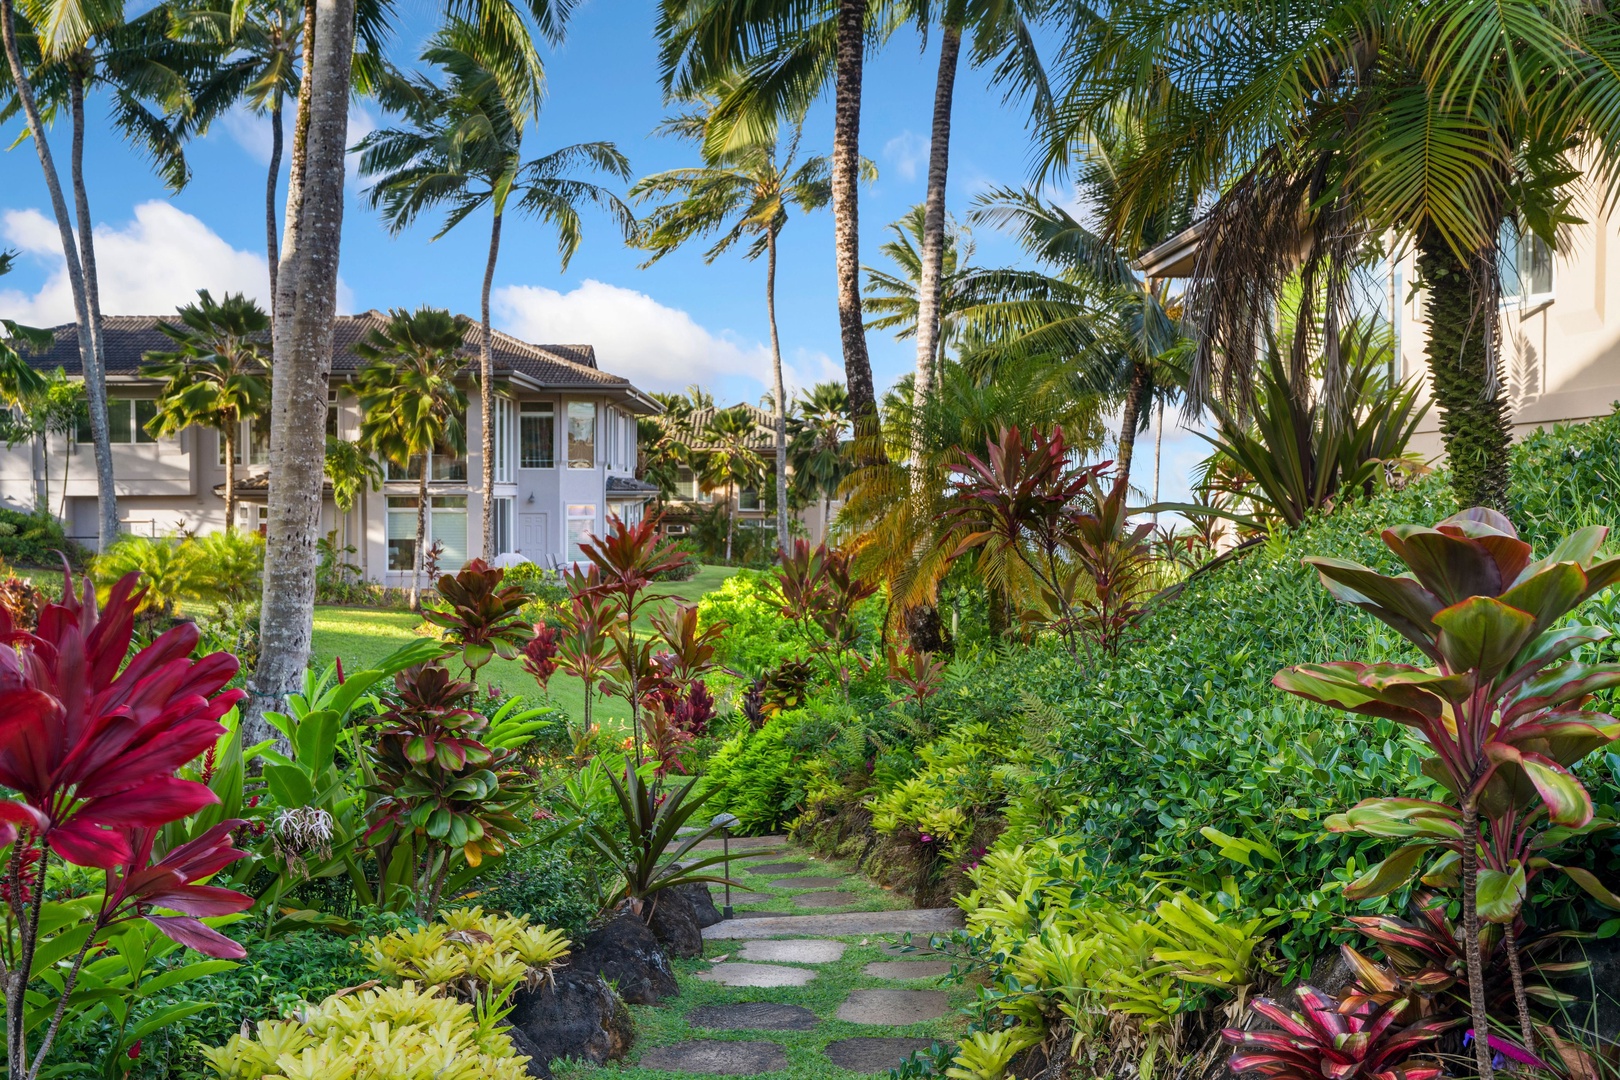 Princeville Vacation Rentals, Tropical Elegance - The gentle rustling of palm fronds and the sweet scent of blooming flowers make this a truly idyllic retreat.